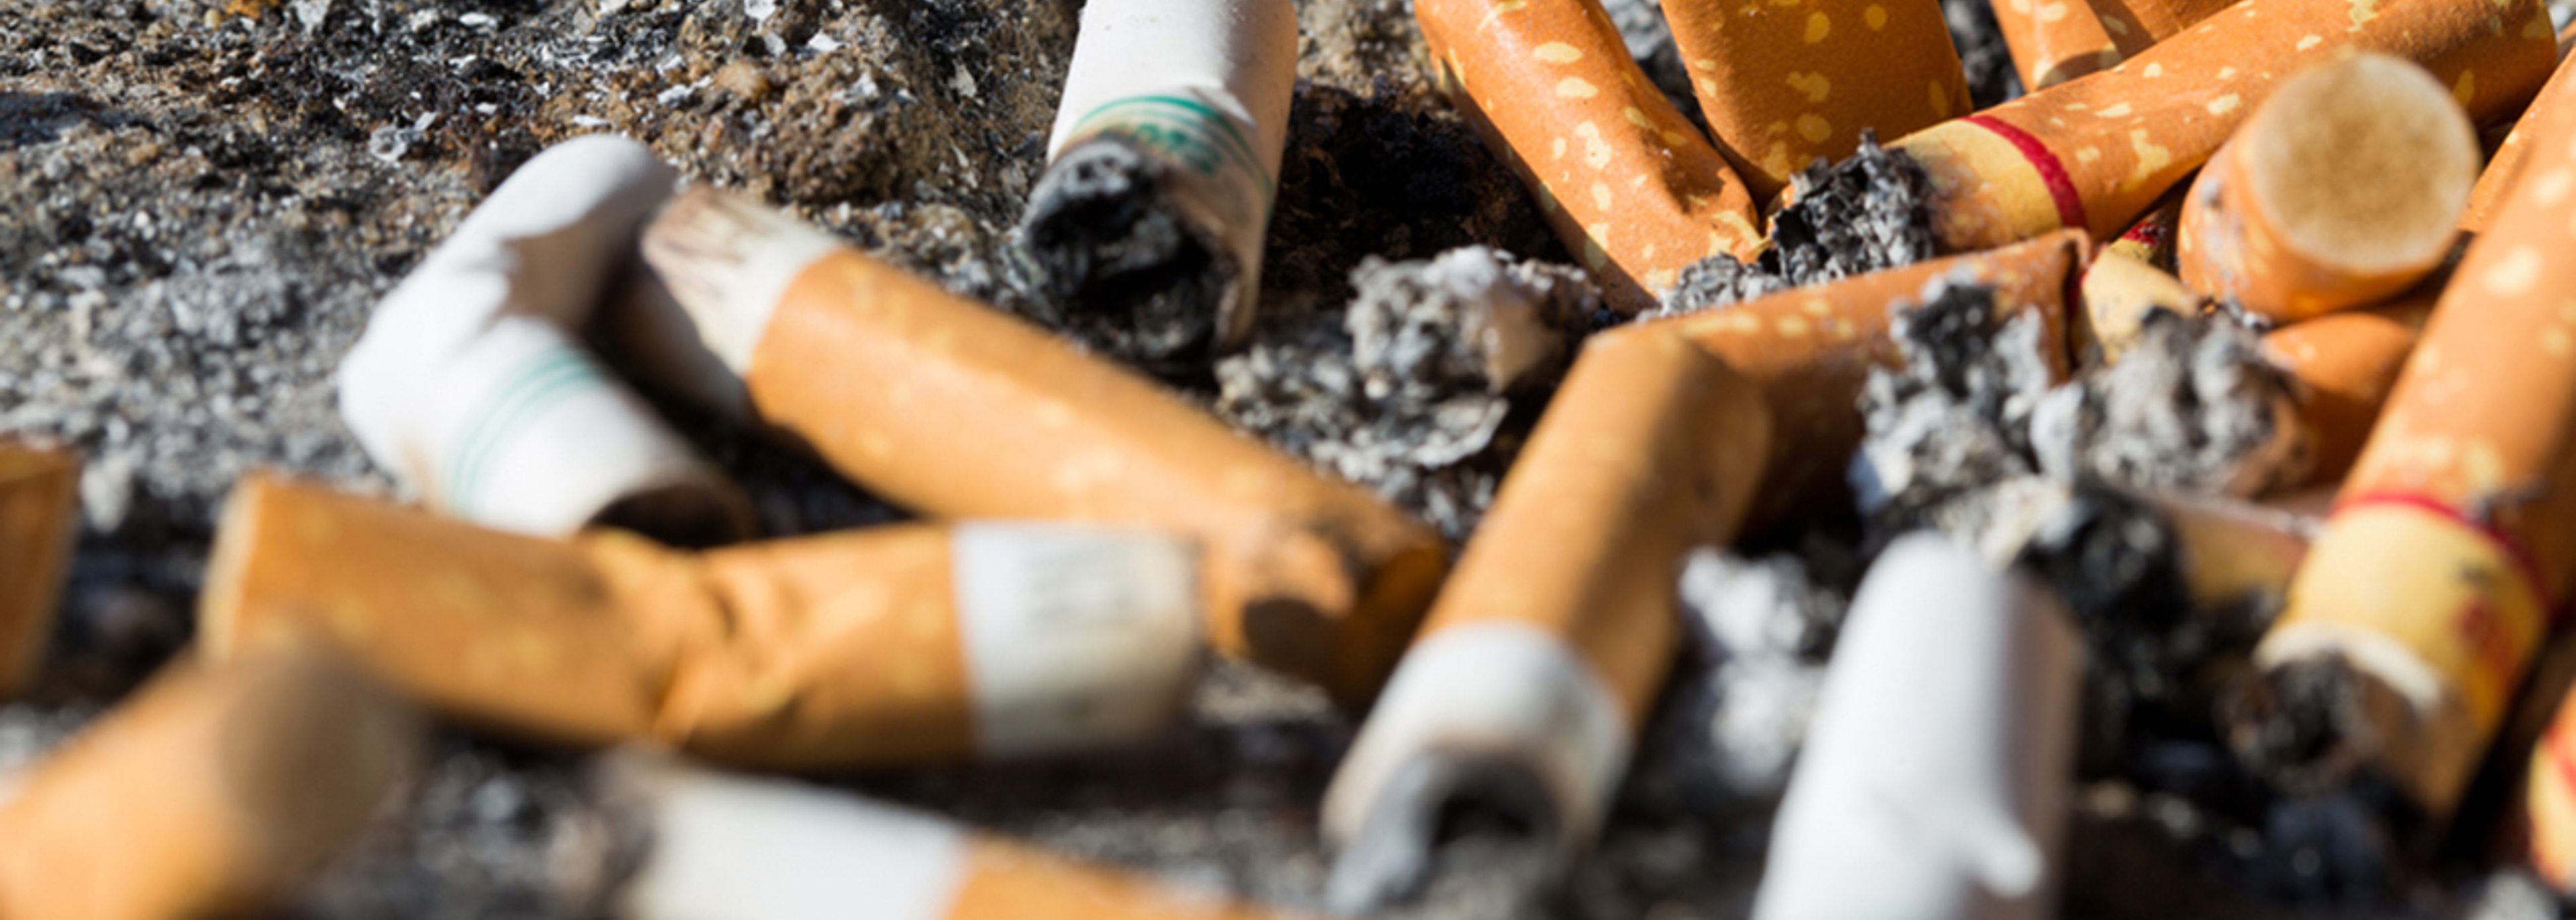 EU takes legal steps to tackle cigarette butt pollution